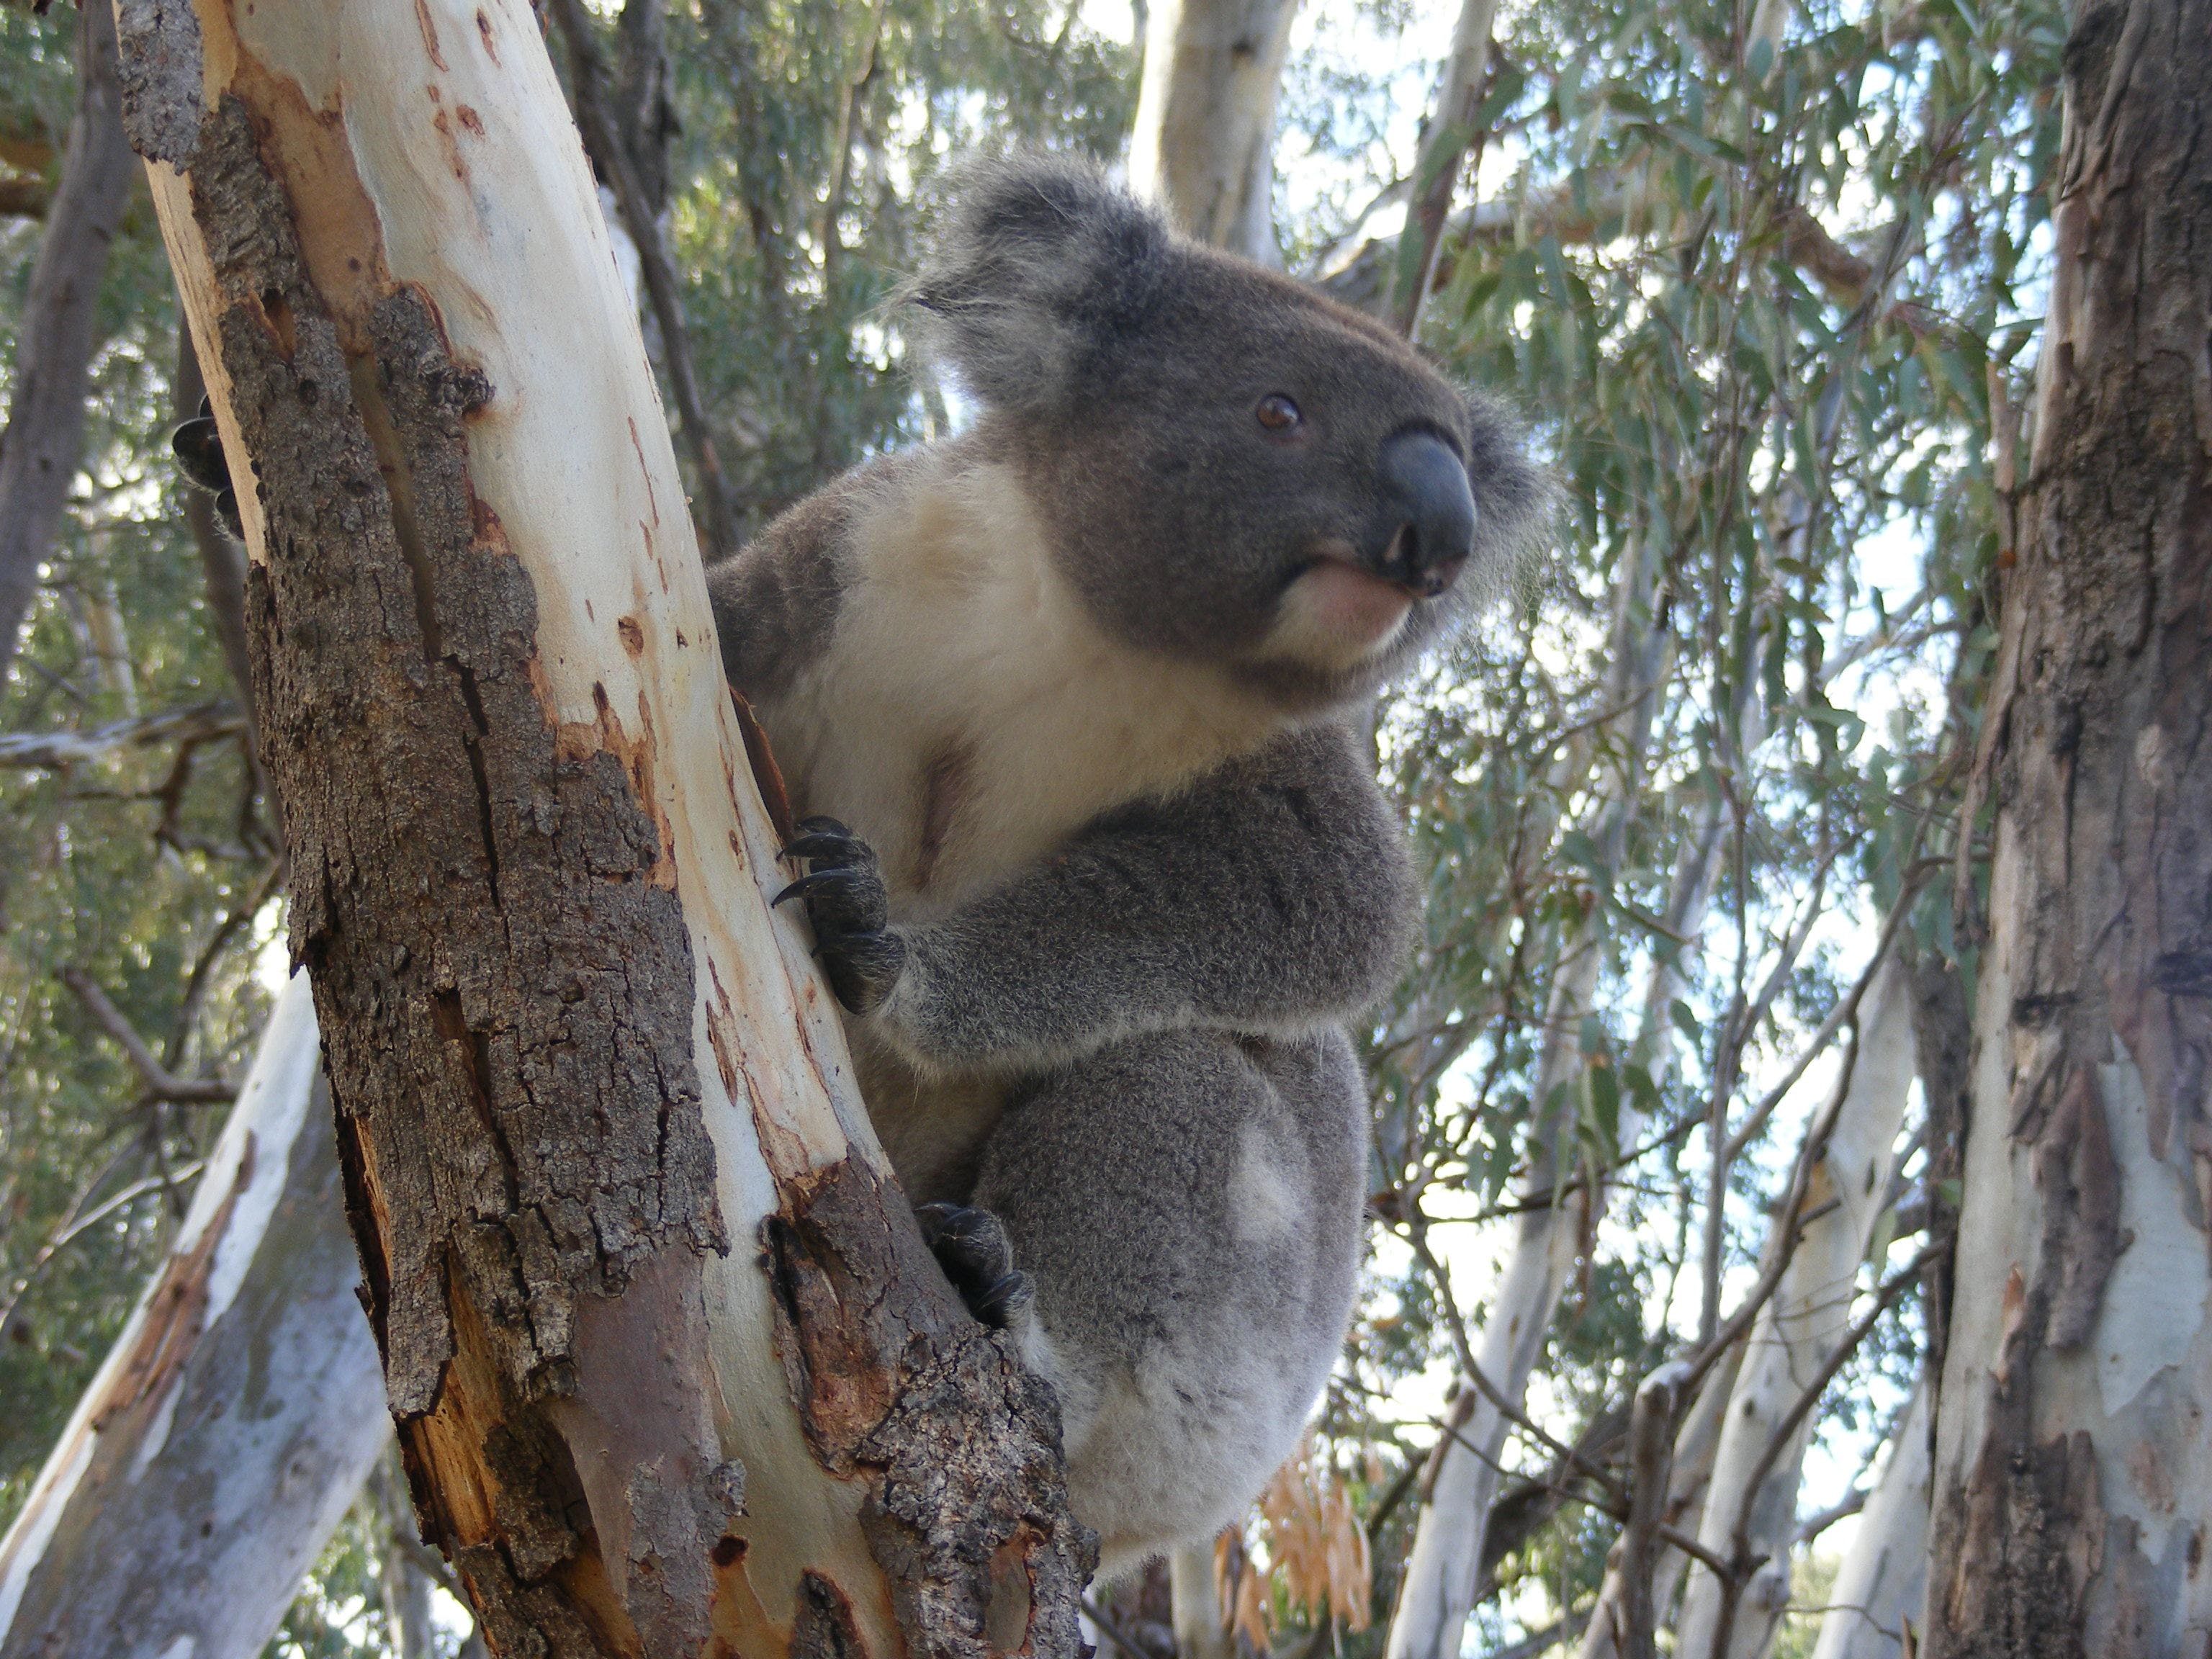 Annual Koala Count - Pubs and Clubs